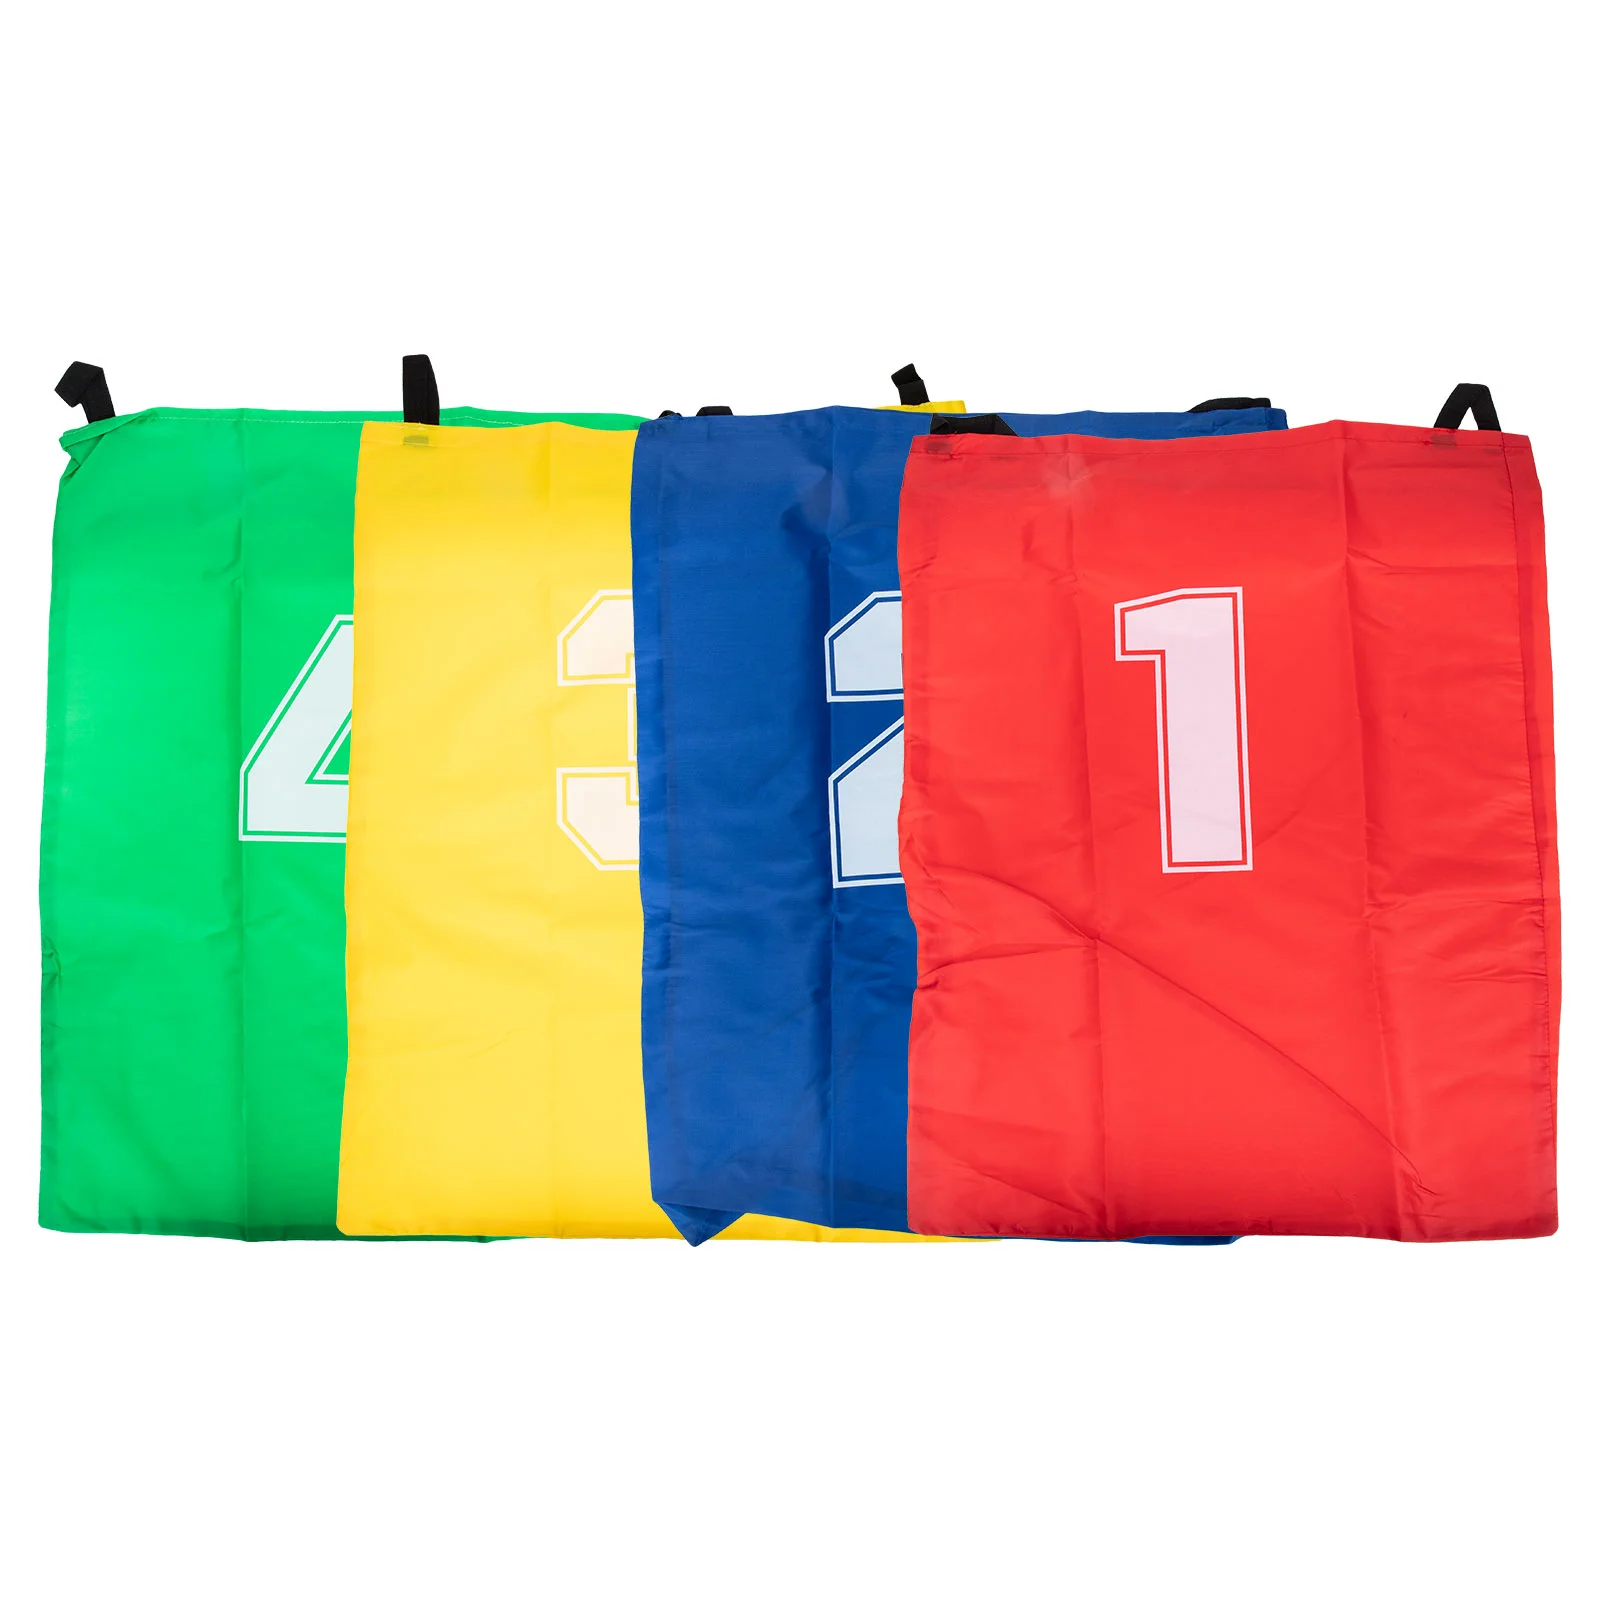 

4 Pcs Kids Playset Outdoor Jumping Bag Toy Interactive Toys Bagged 71.5x51.5cm Game Prop Sack Race Canvas Carnival Party Child